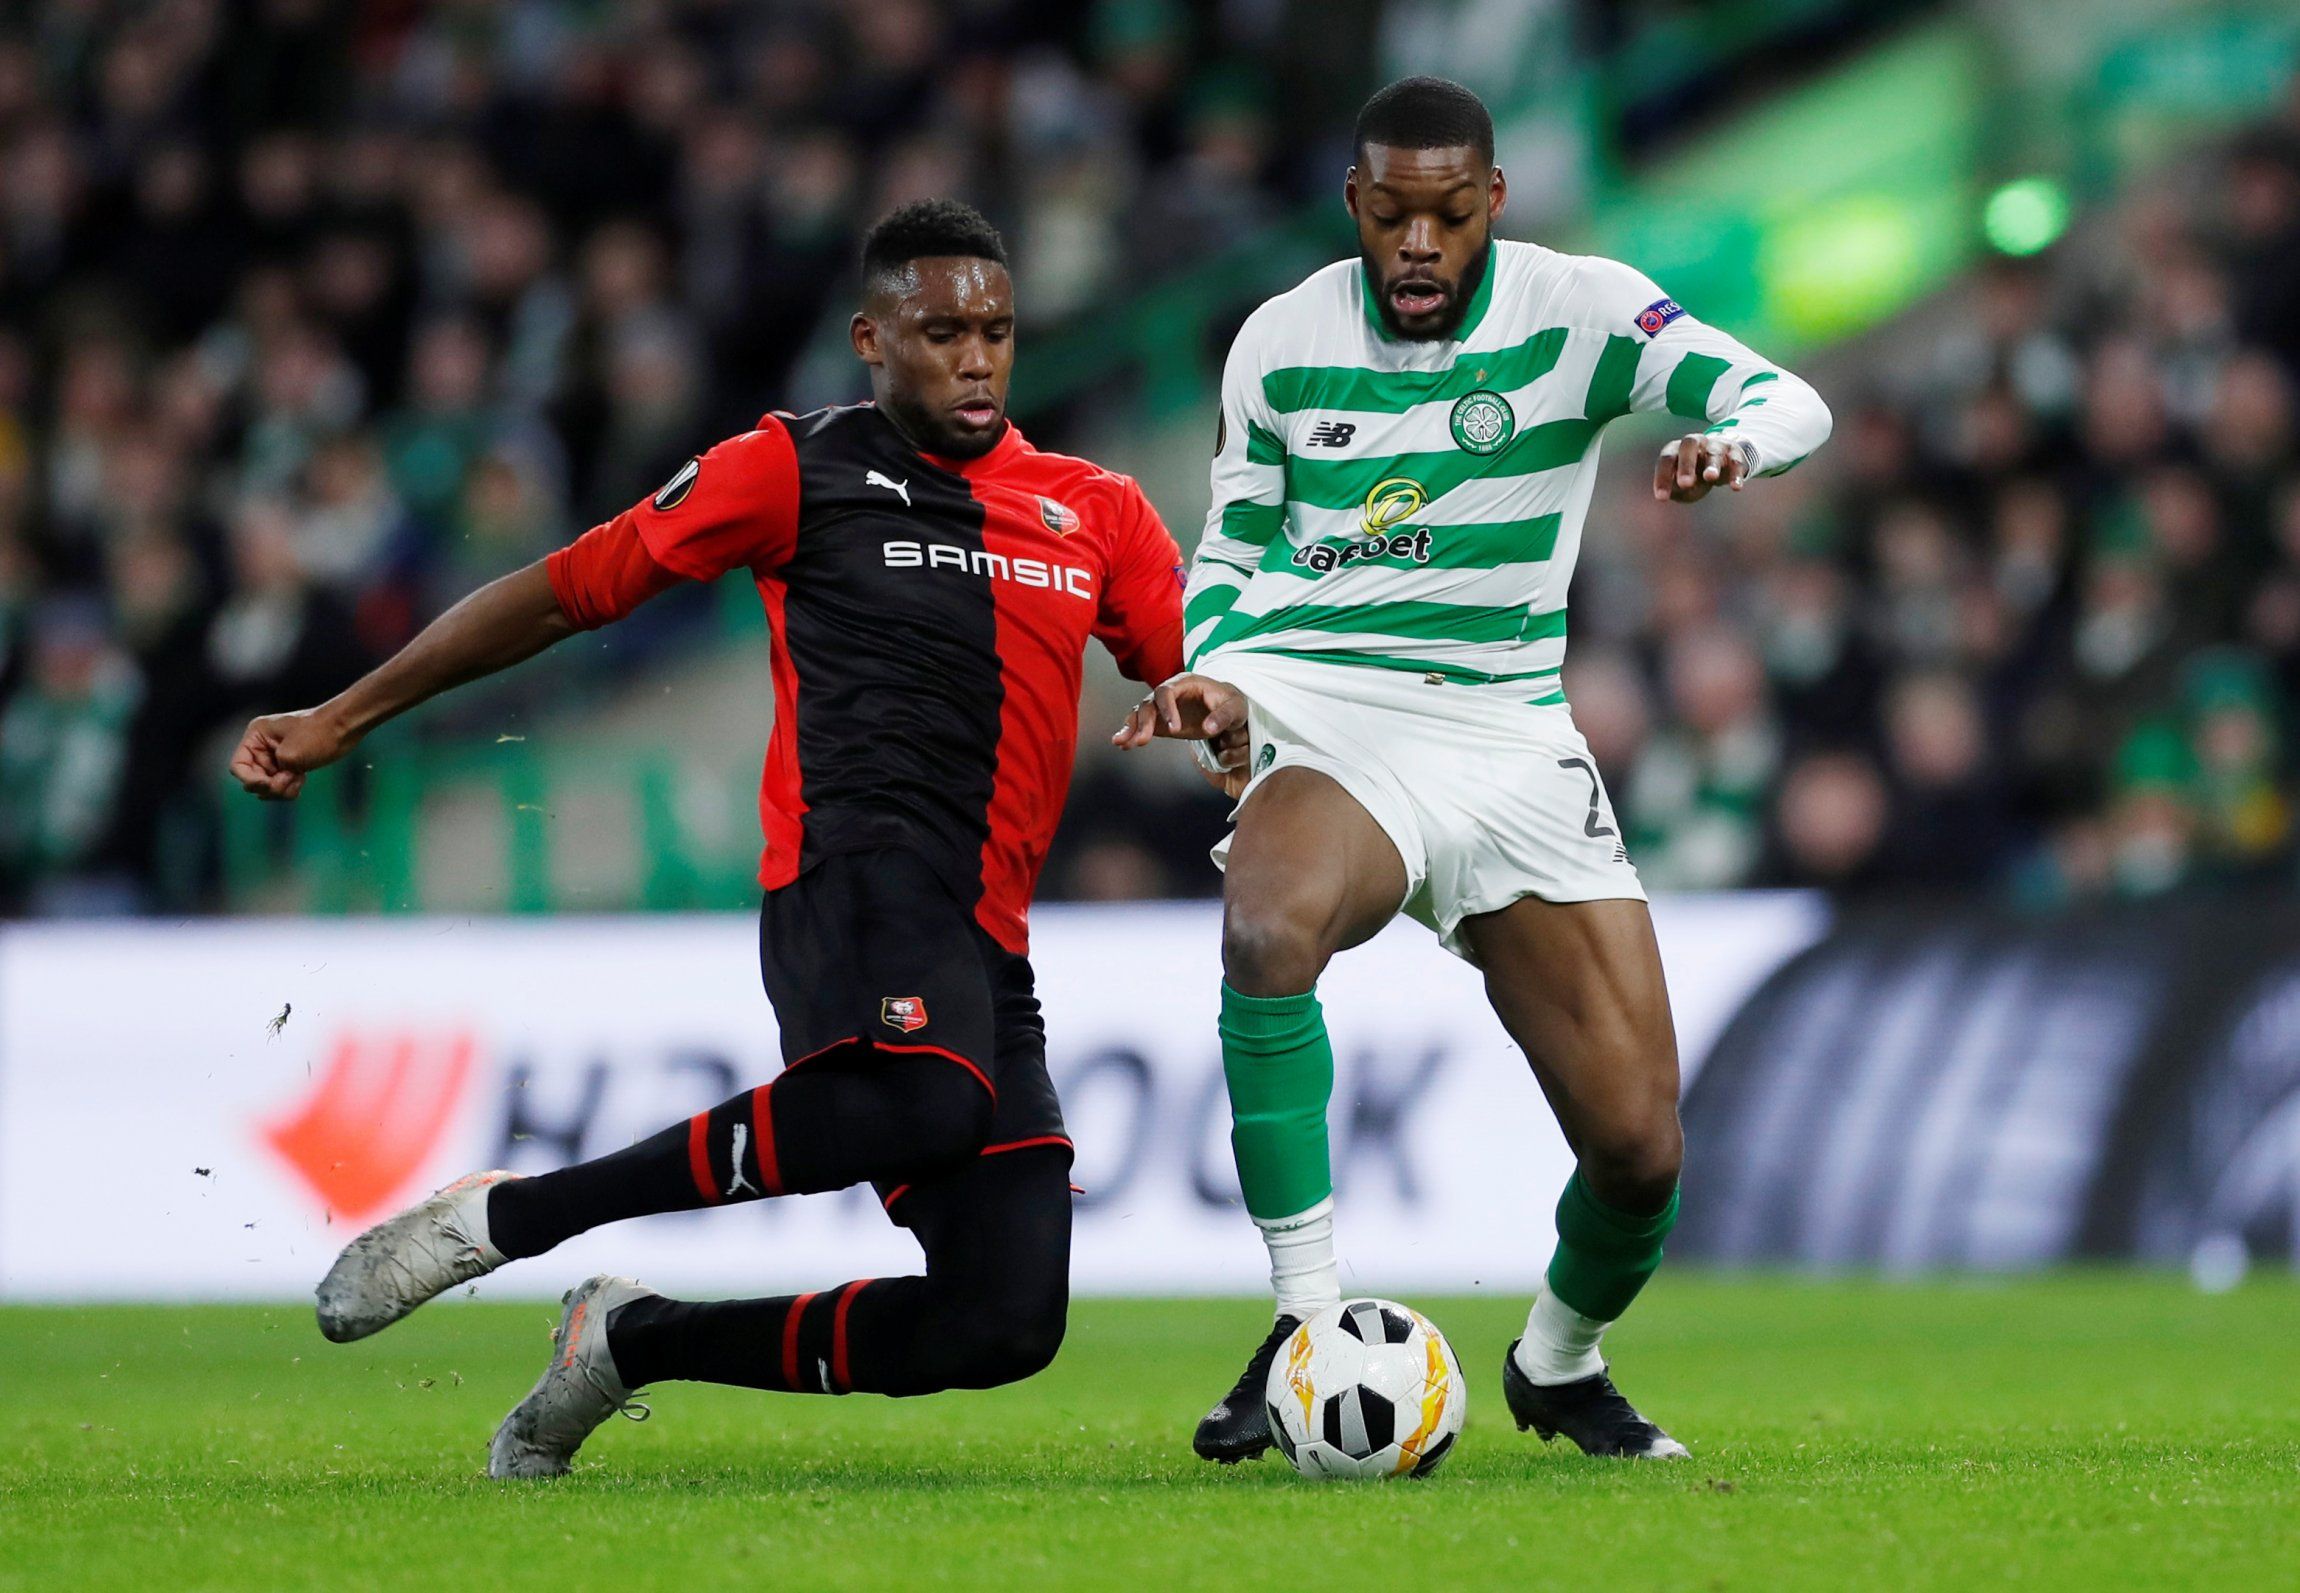 celtic midfielder olivier ntcham in action vs stade rennes europa league west brom transfer rumours